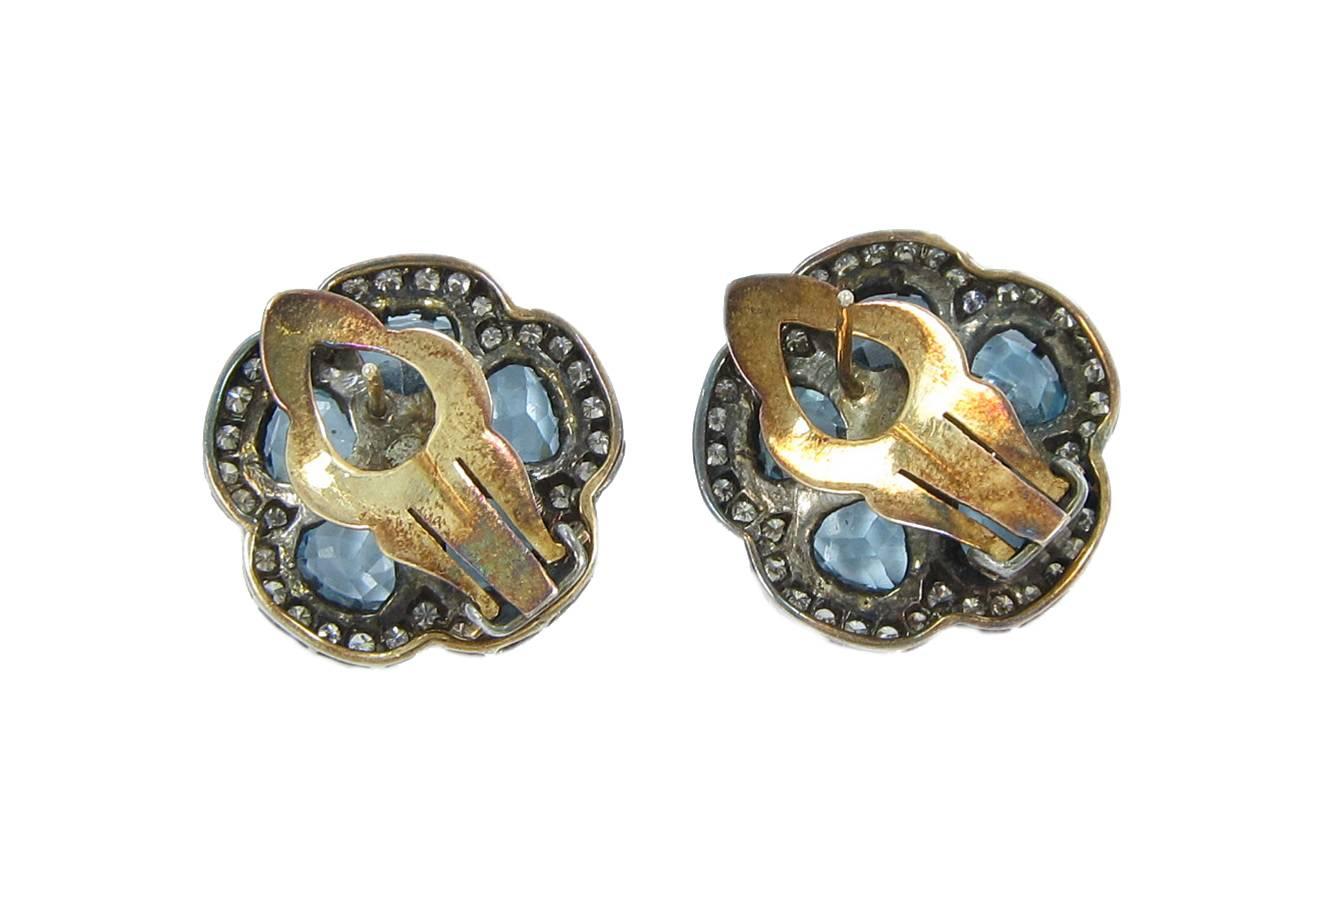 These beautiful 14k yellow gold and sterling silver diamond earrings hold five blue topaz all securely prong set. The silver on these earrings show tarnished and wear. Earrings have not been polished to keep the vintage look. The backings hold